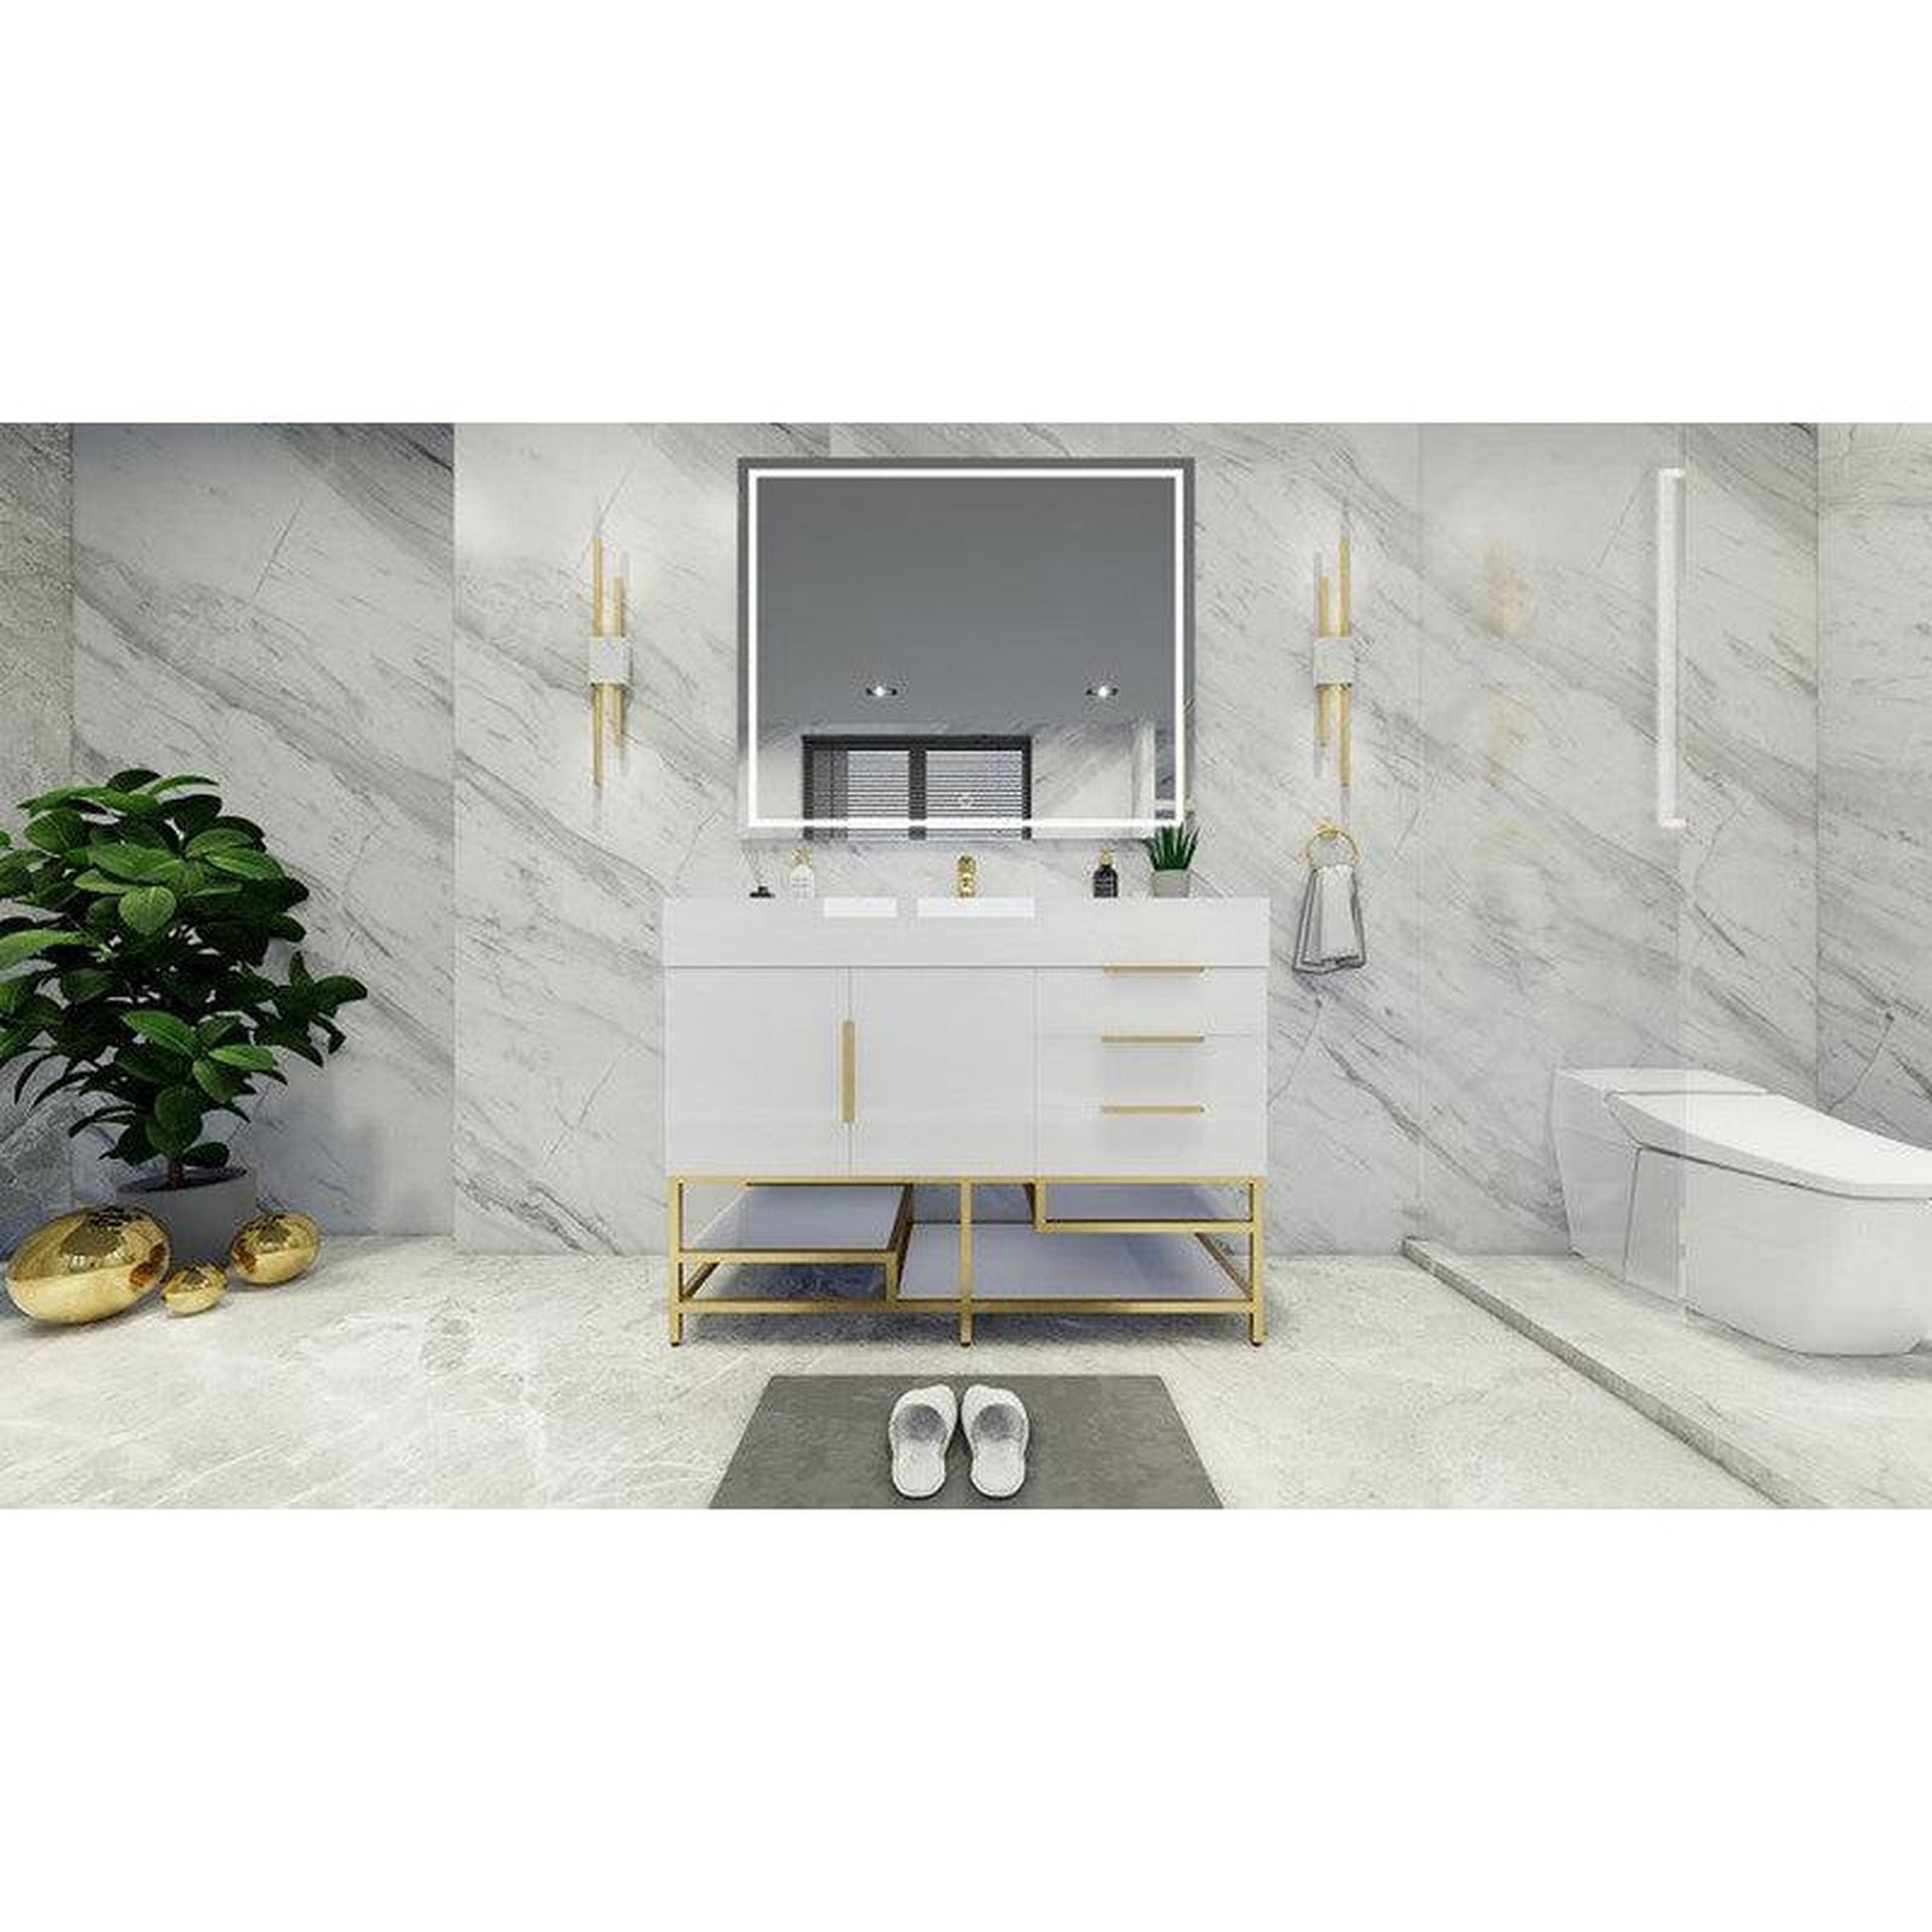 Moreno Bath Bethany 48" High Gloss White Freestanding Vanity With Single Reinforced White Acrylic Sink